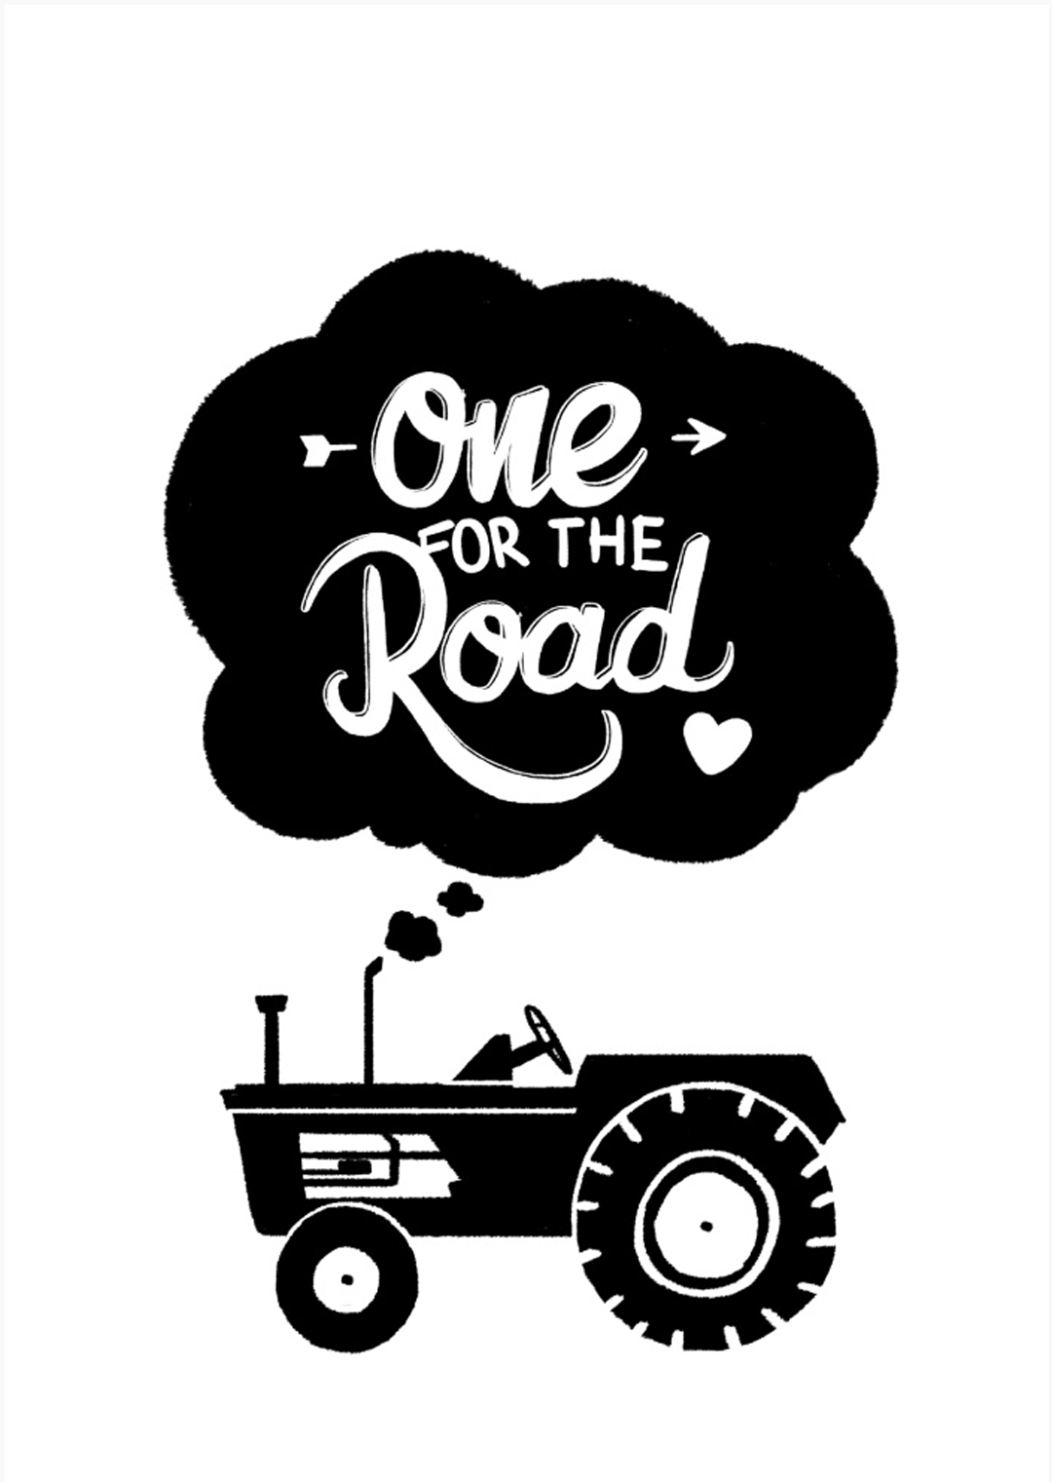 2D Black and White Tractor Illustration